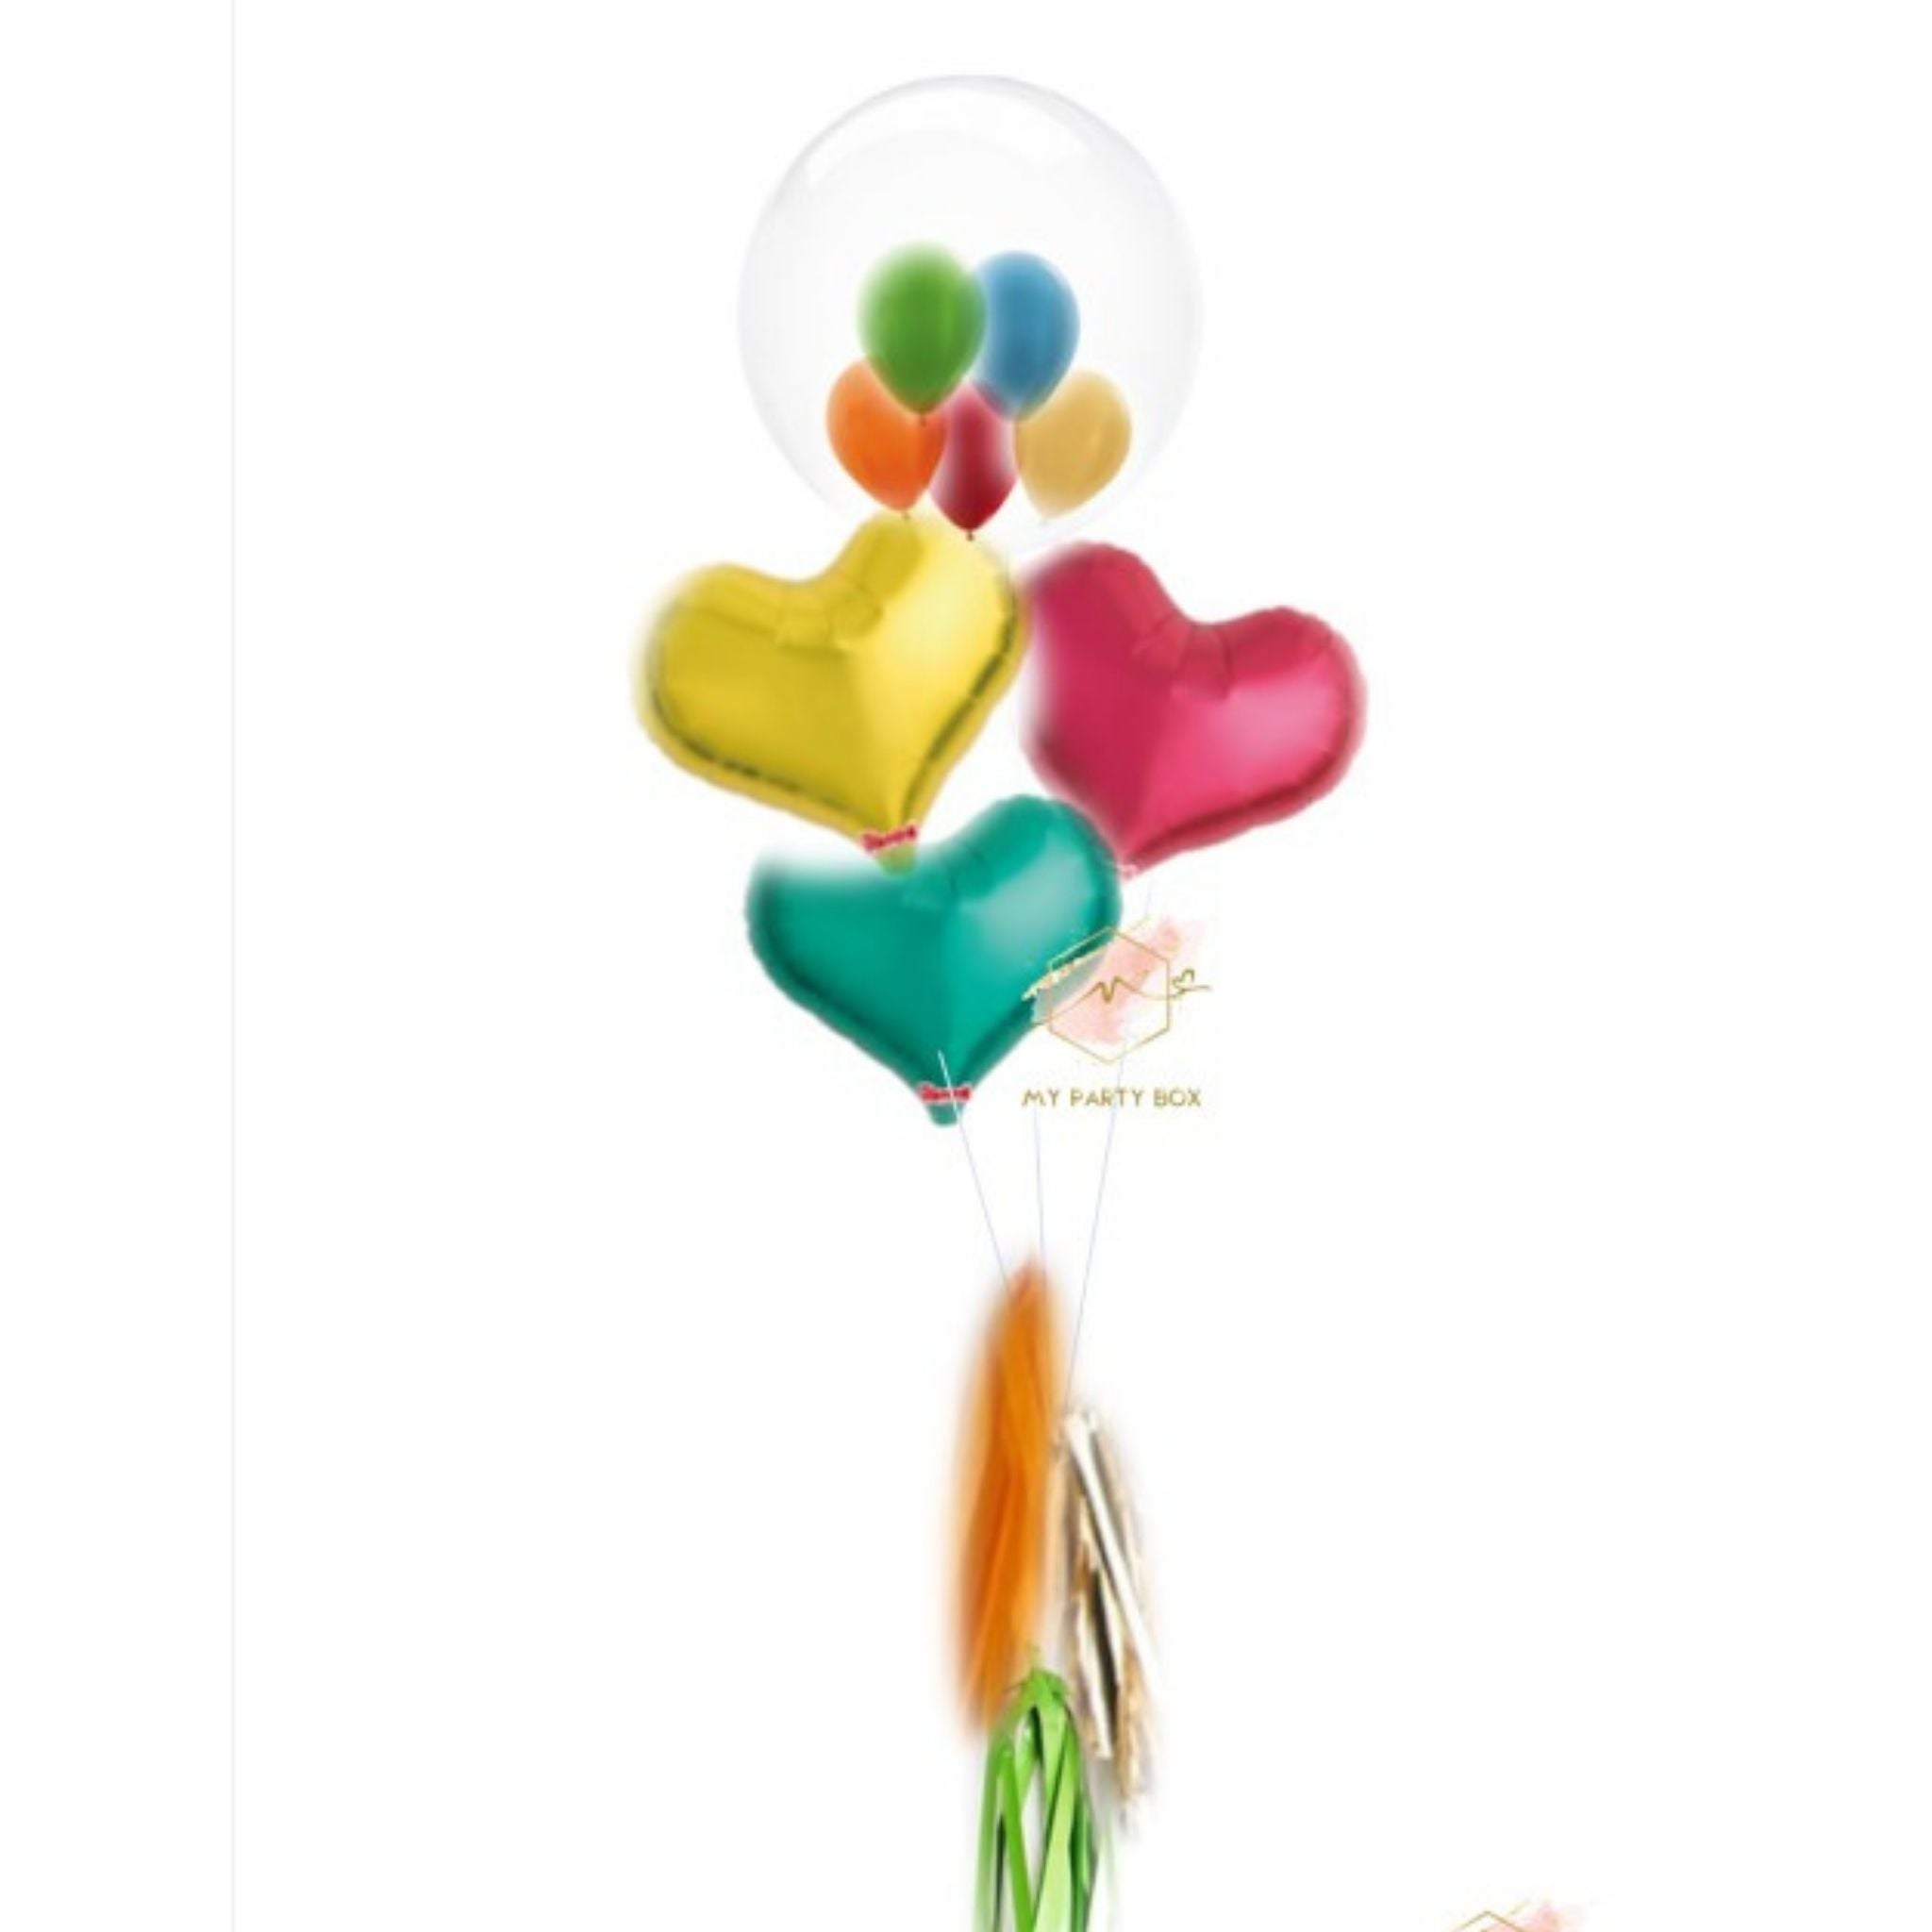 My Party Box Bubble Gum Balloon Bouquet with one bubble balloon with mini latex balloon inside and one Green foil heart balloon, one Gold foil heart balloon and one red Foil Heart Balloon